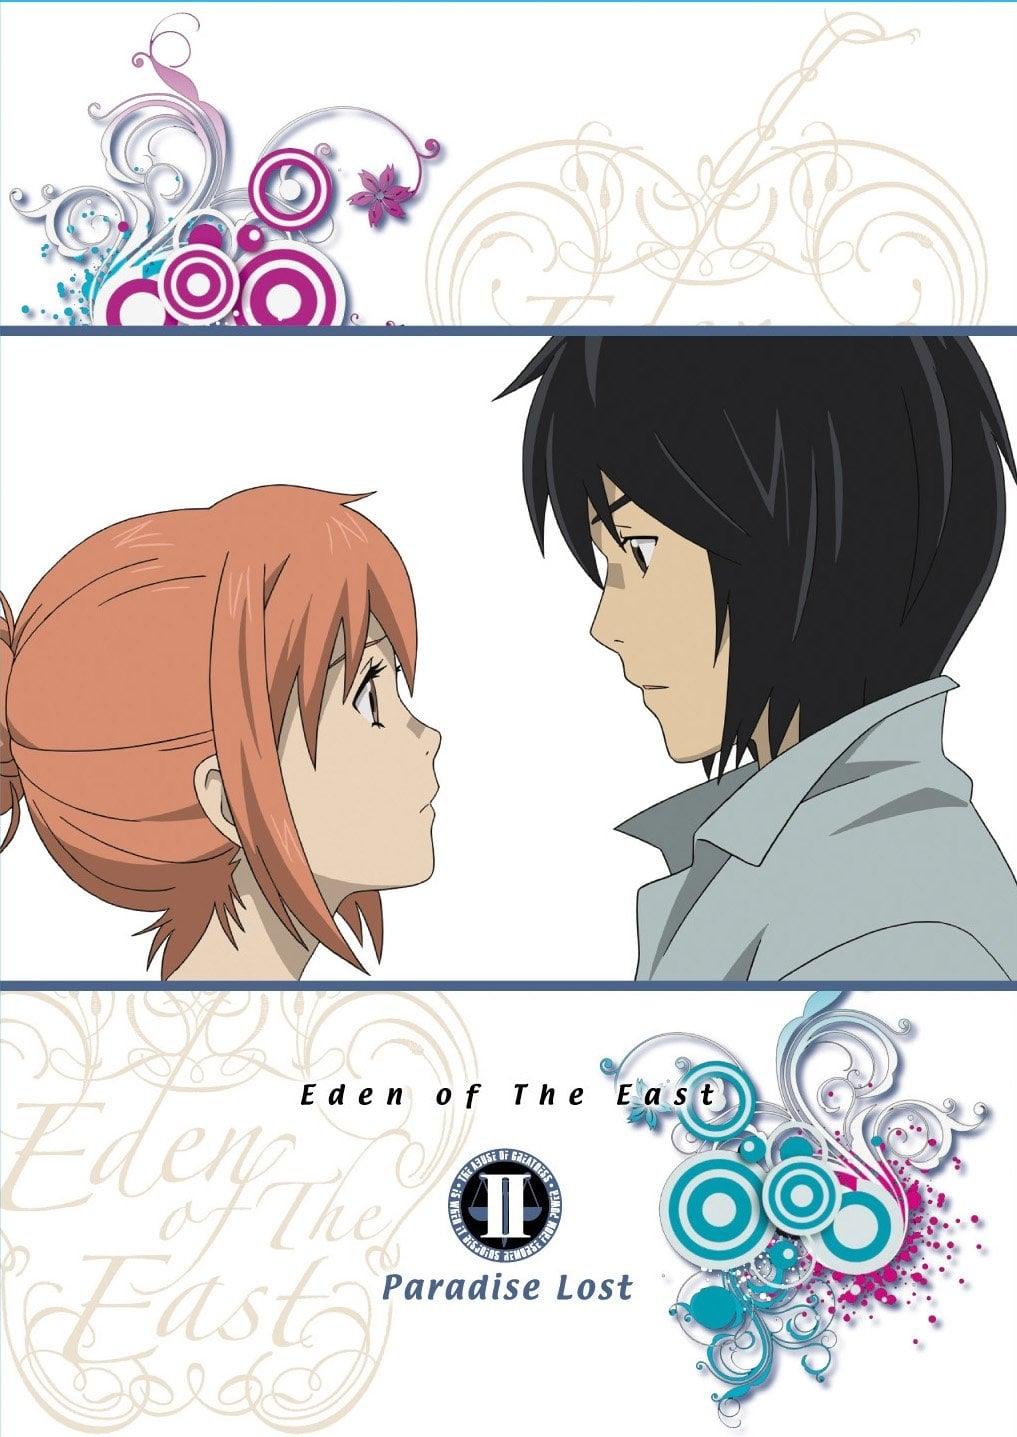 Eden of the East Movie II: Paradise Lost poster